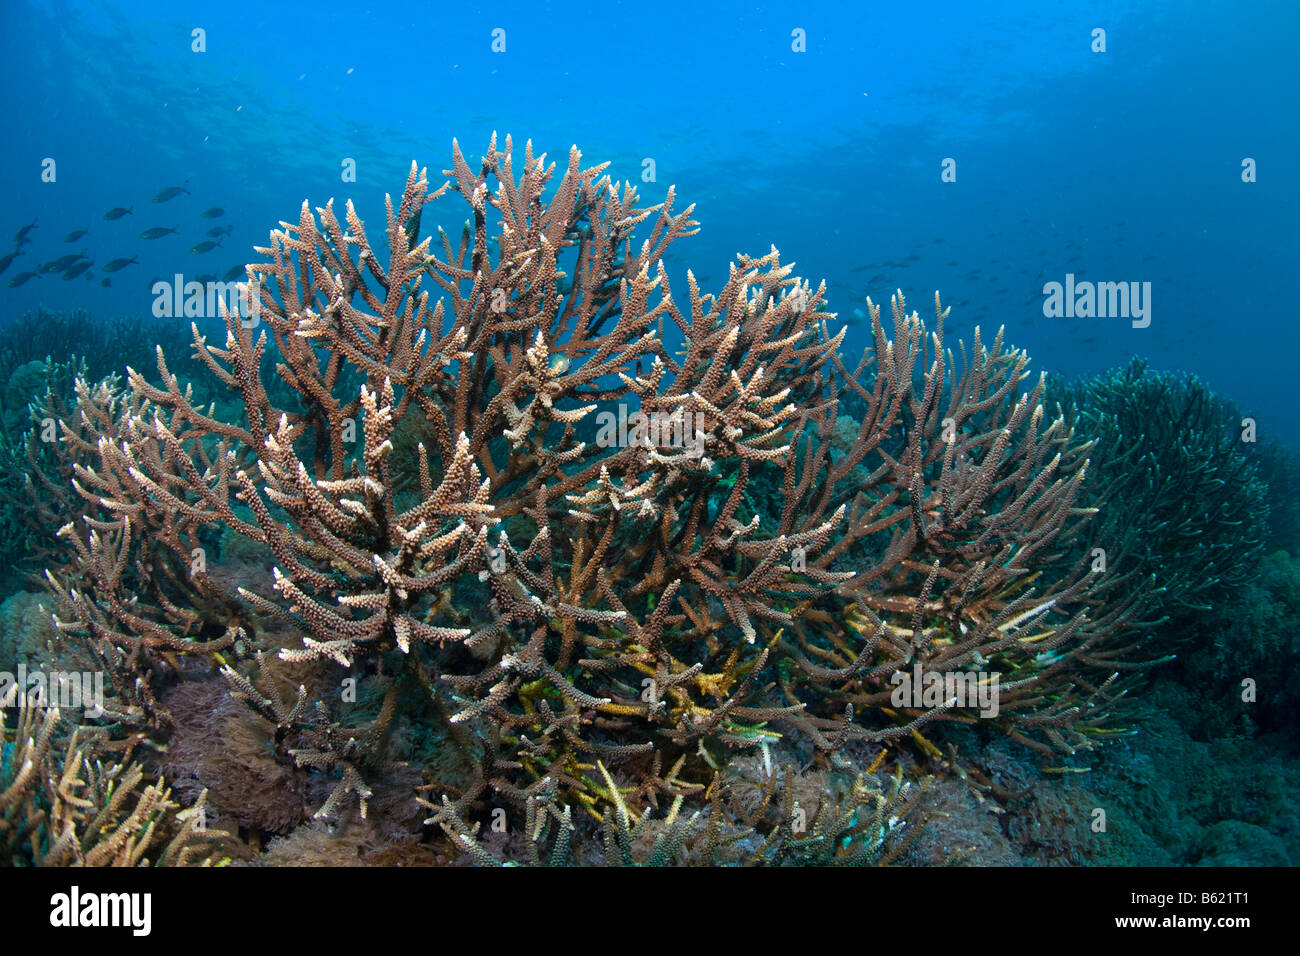 Branching Staghorn (Acropora sp) in a coral reef, Indonesia, Southeast Asia Stock Photo